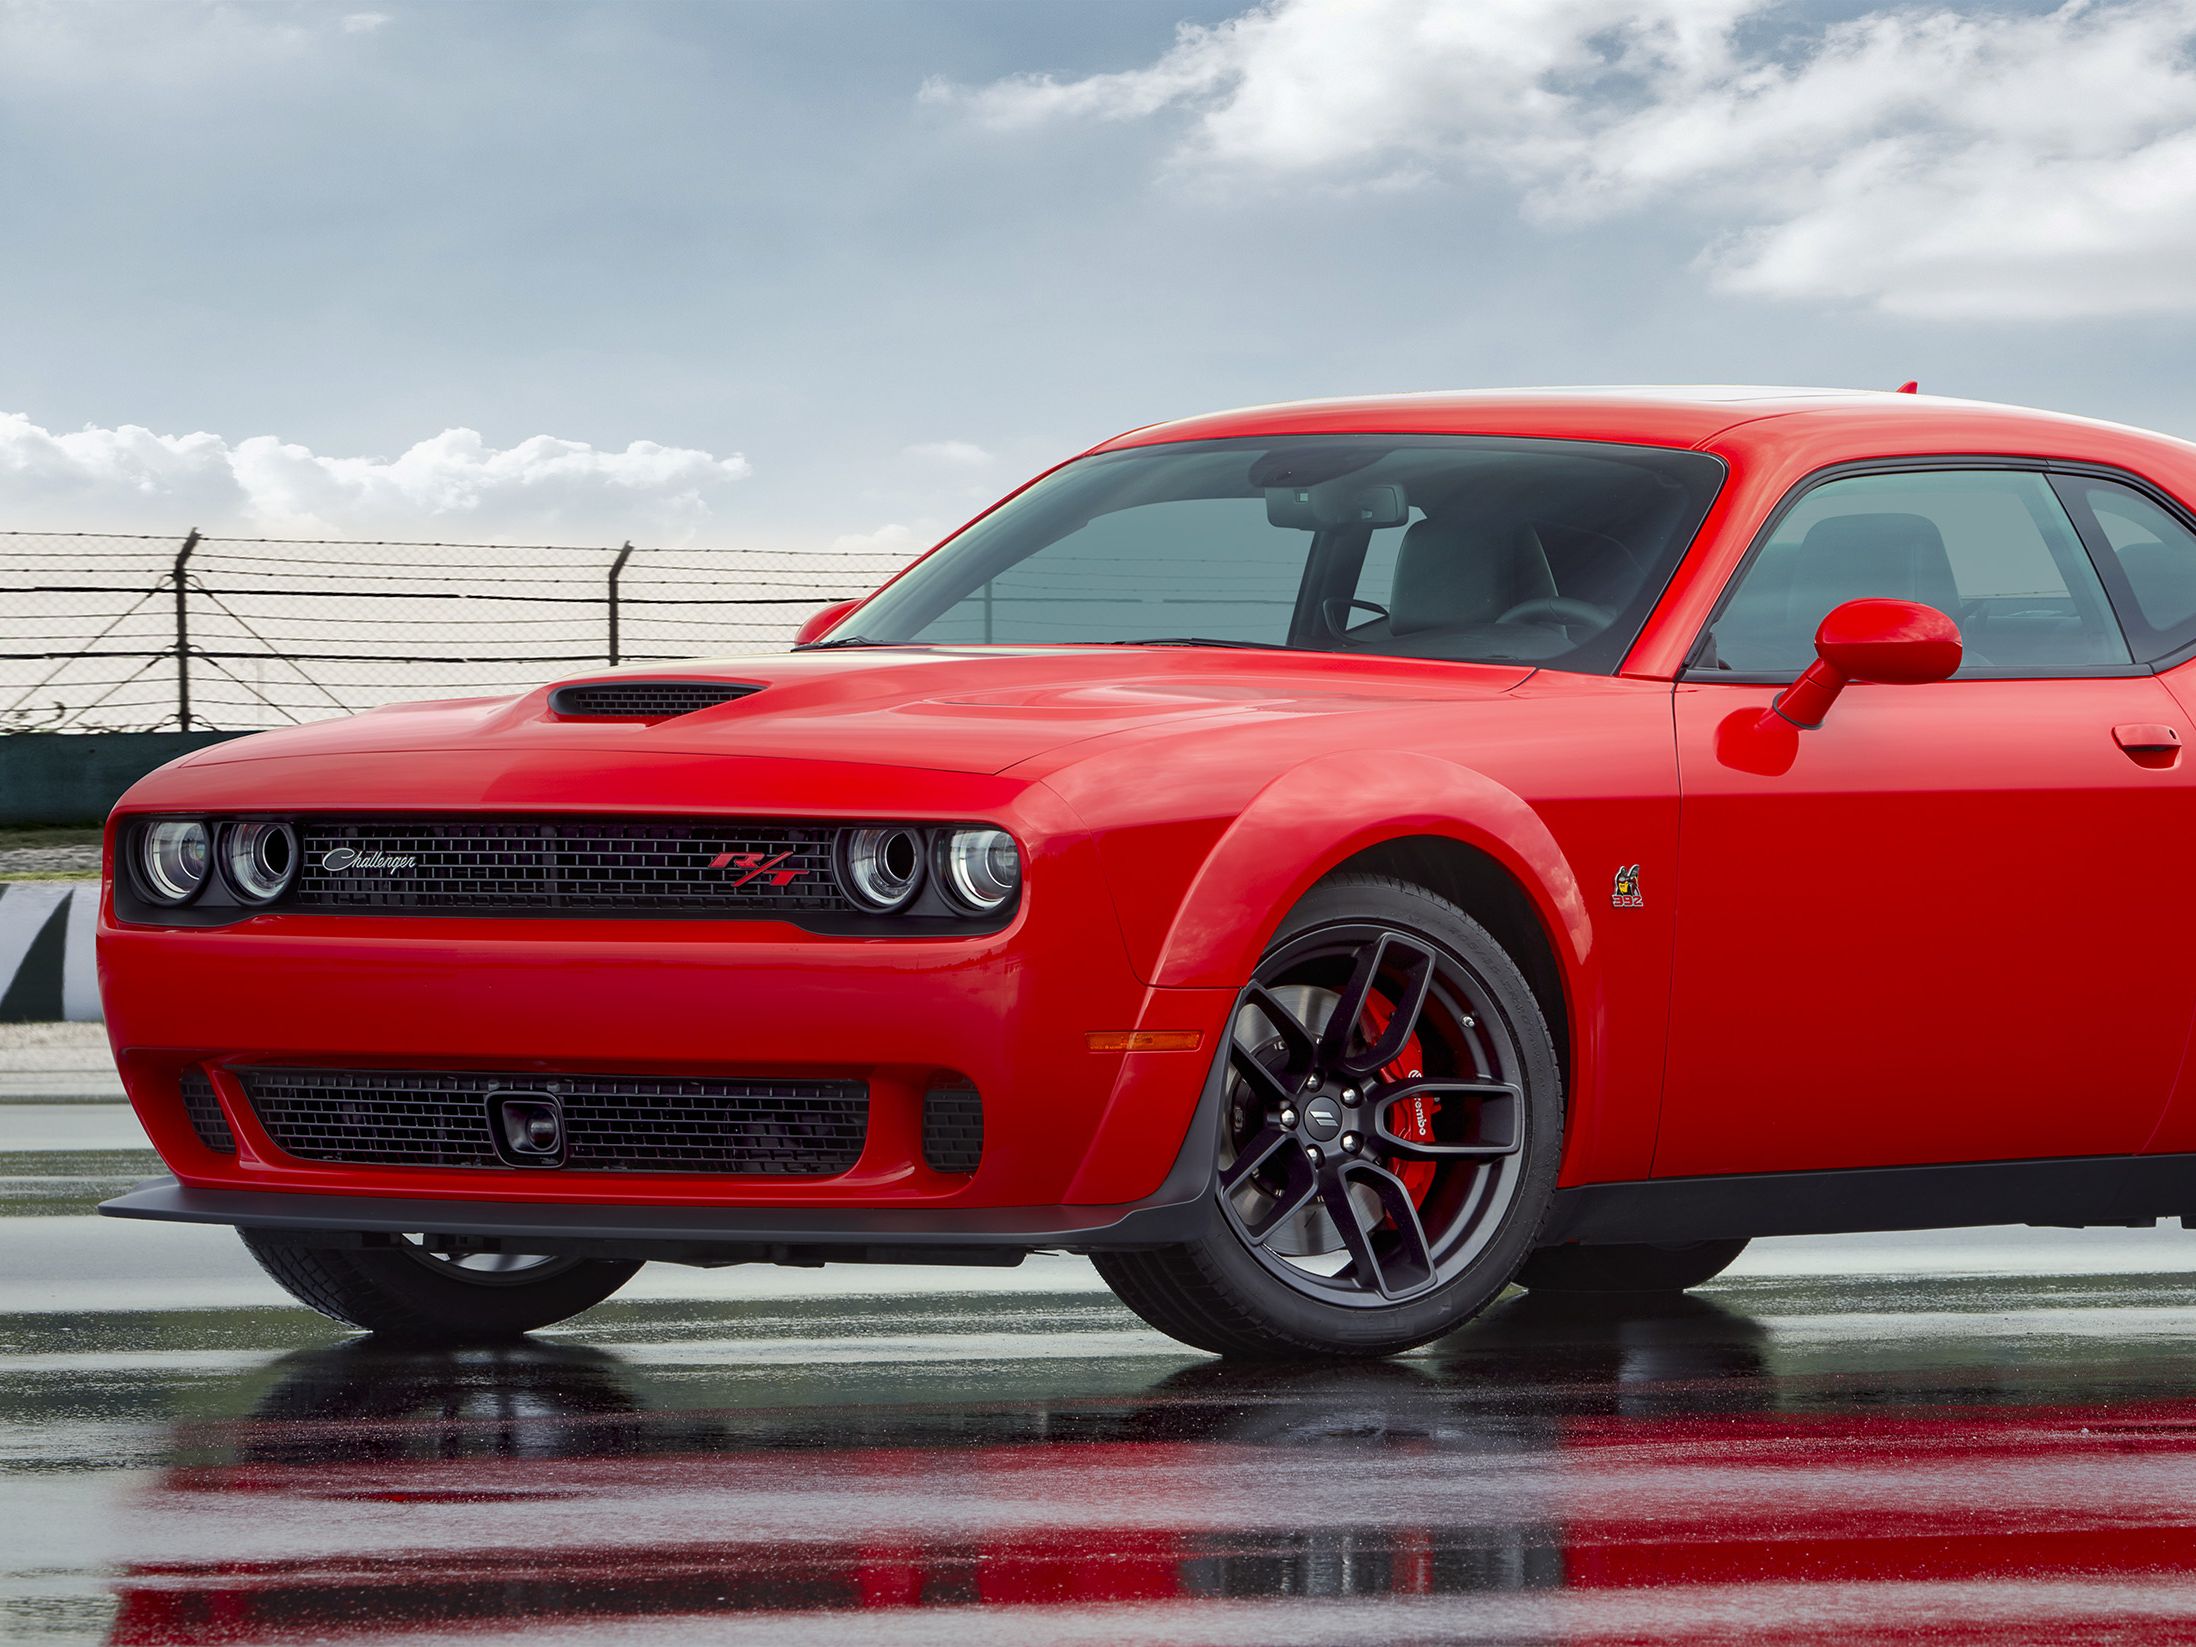 Dodge Vehicles: Reviews, Pricing, and Specs